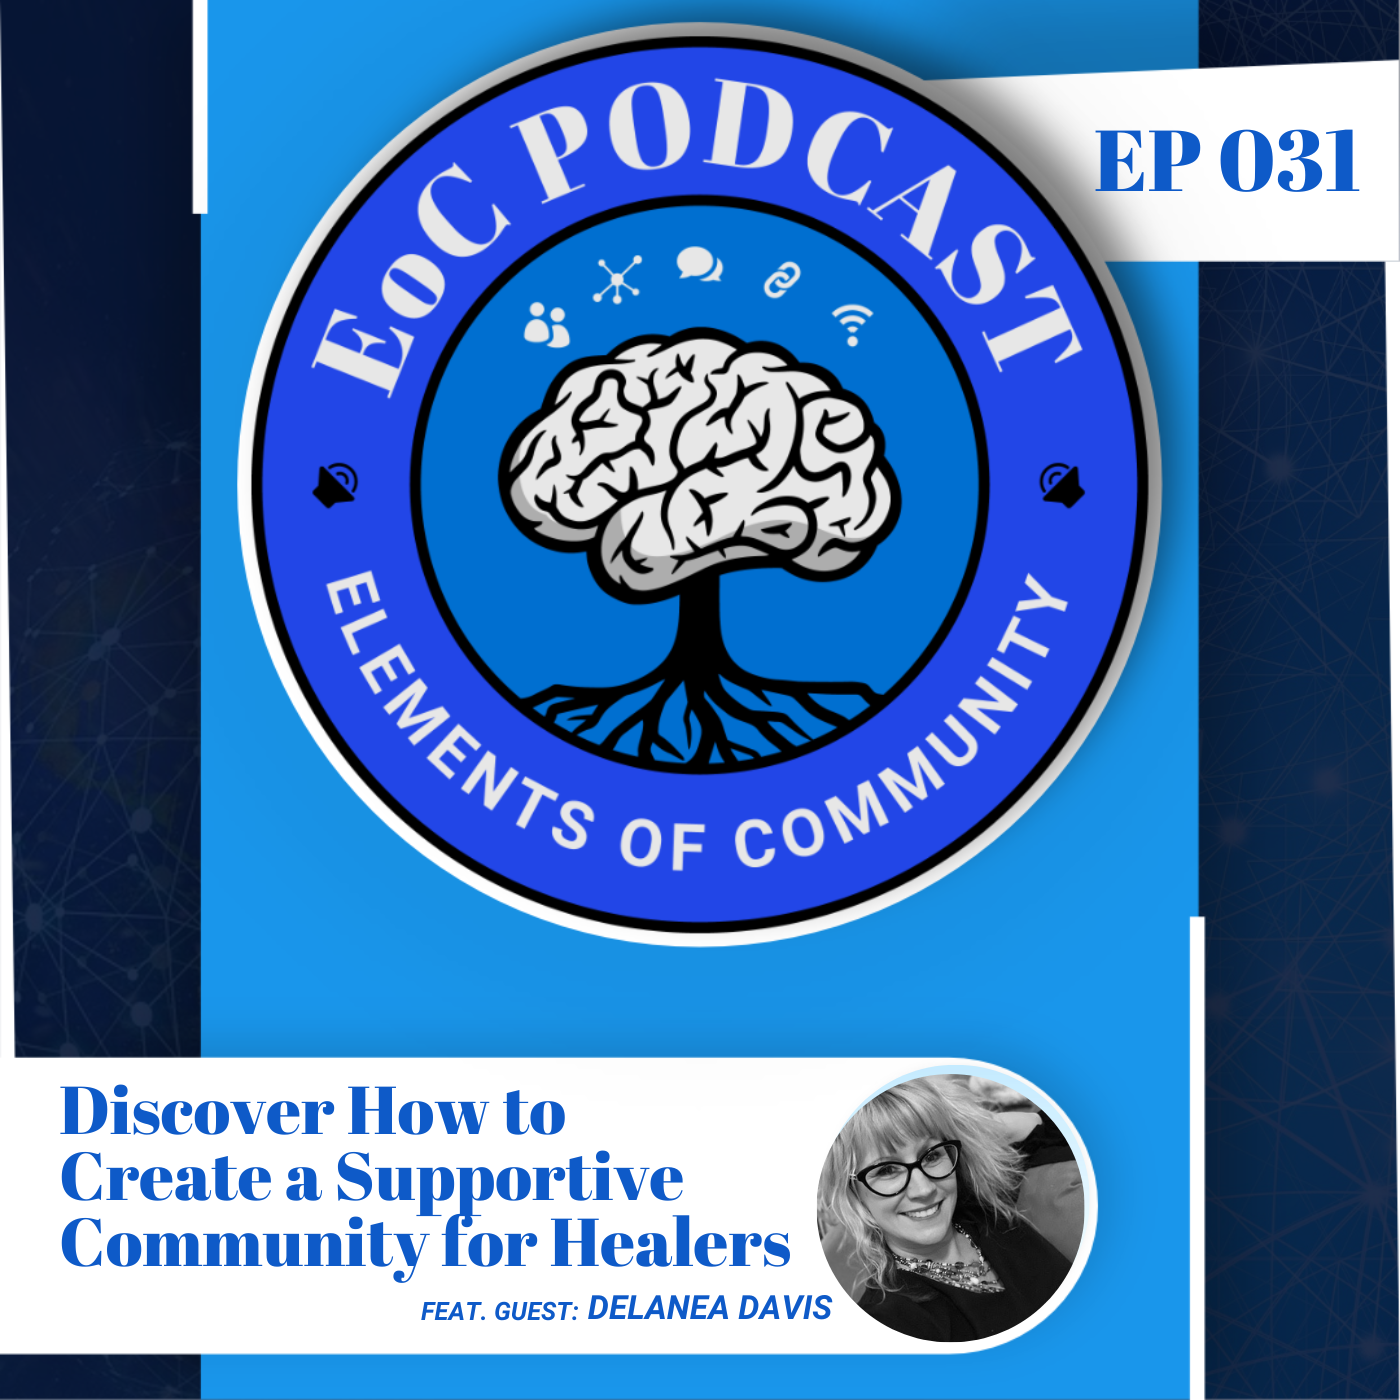 Artwork for podcast Elements of Community